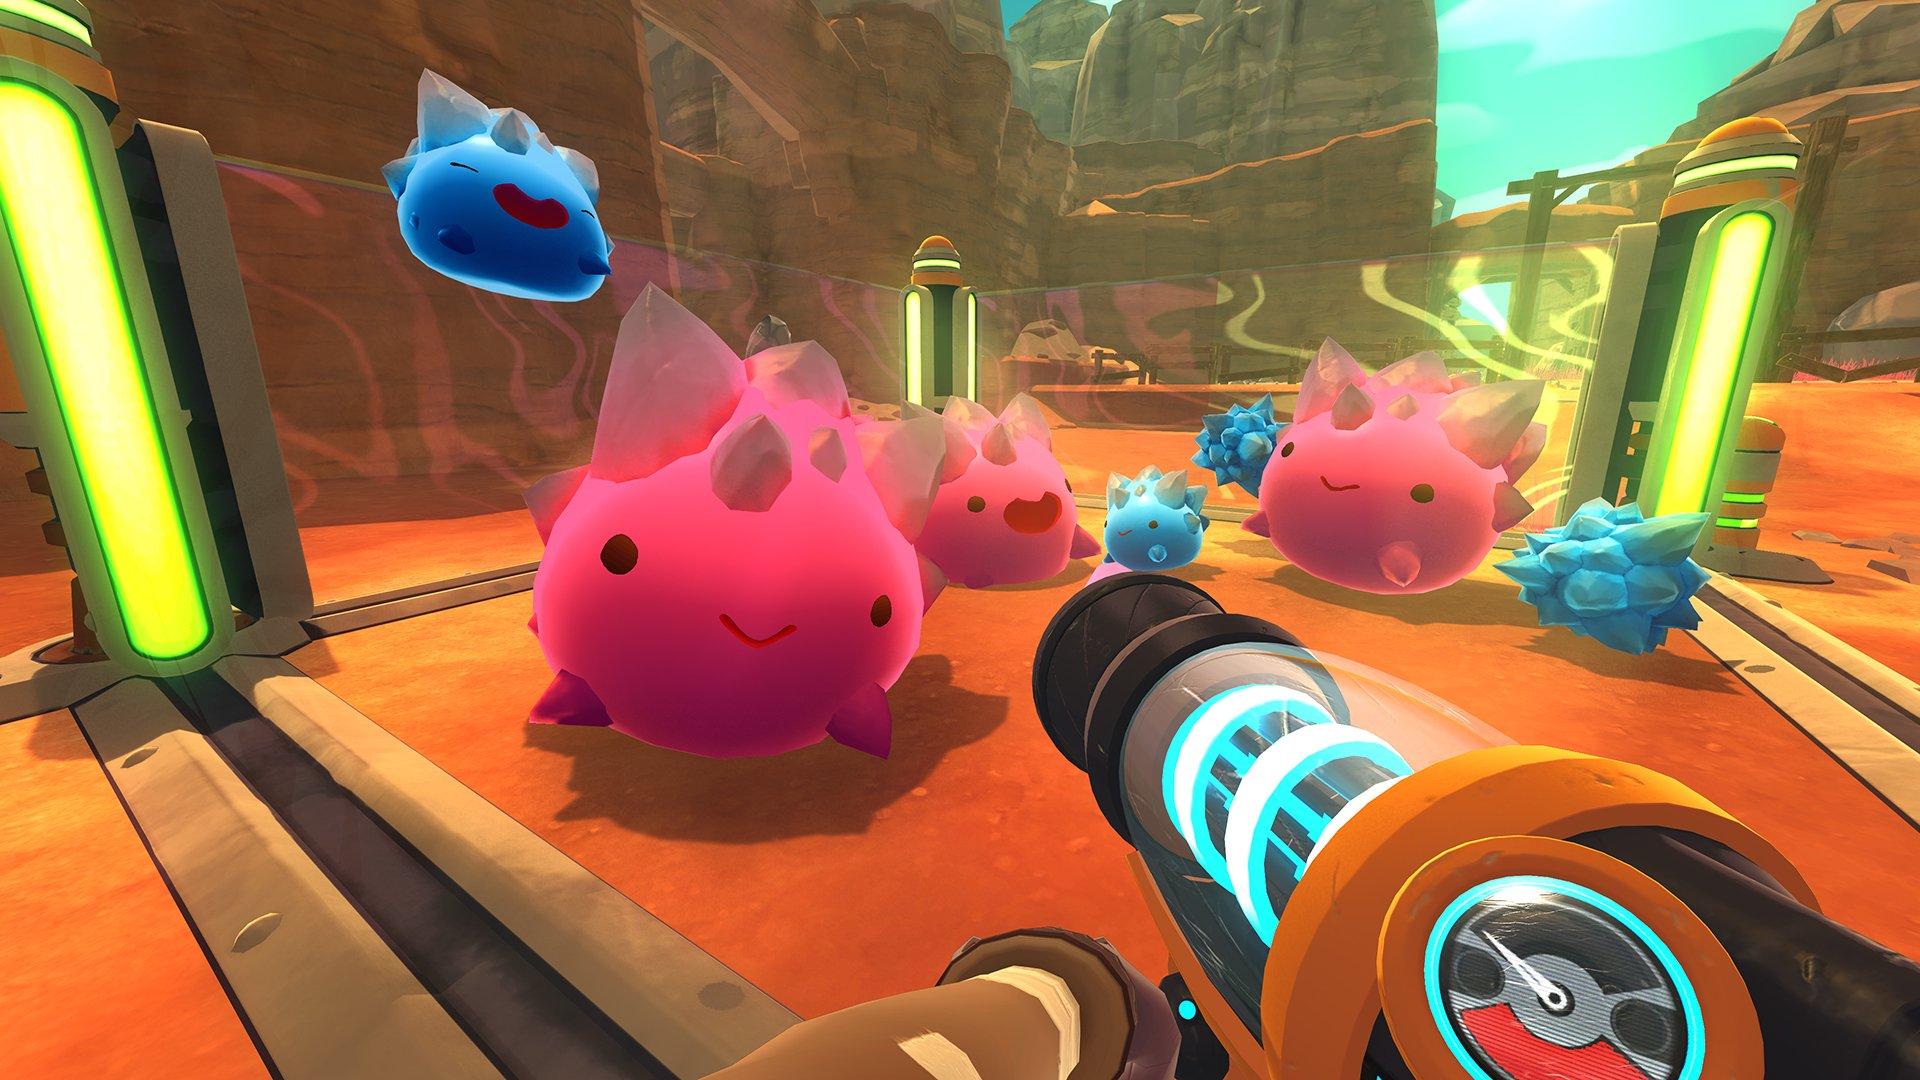 Will Slime Rancher 2 Be on PS4 and PS5? - Answered - Prima Games